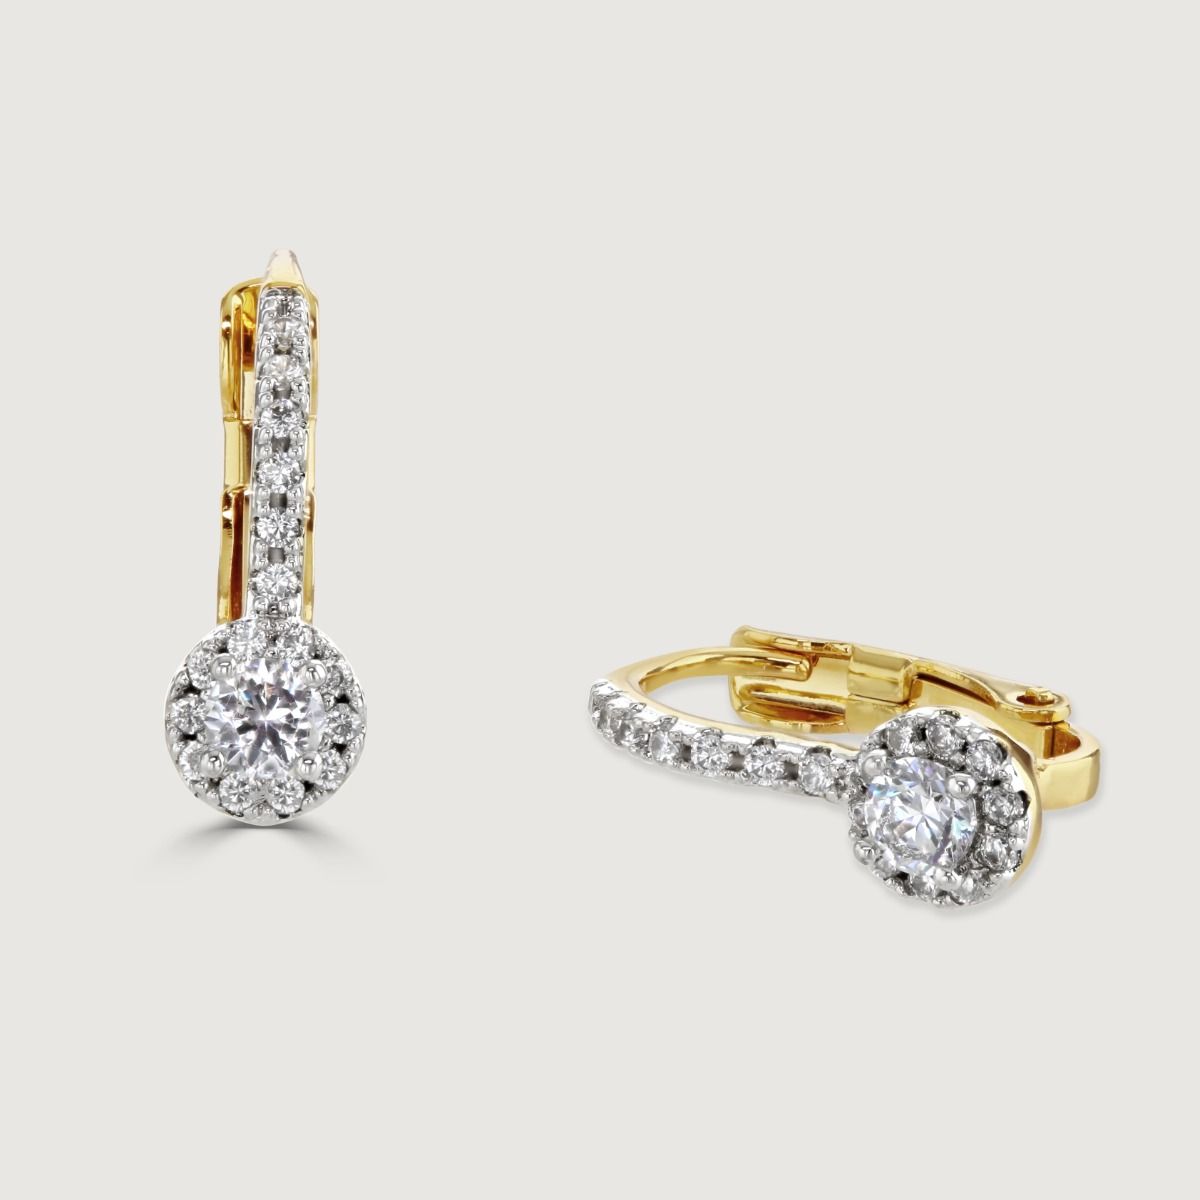 The Pave Hoop Drop Earrings are adorned with cubic zirconia stones along the hoop. It features a suspended round cubic zirconia stone, surrounded by more sparkling gems, which adds a captivating finishing touch. 